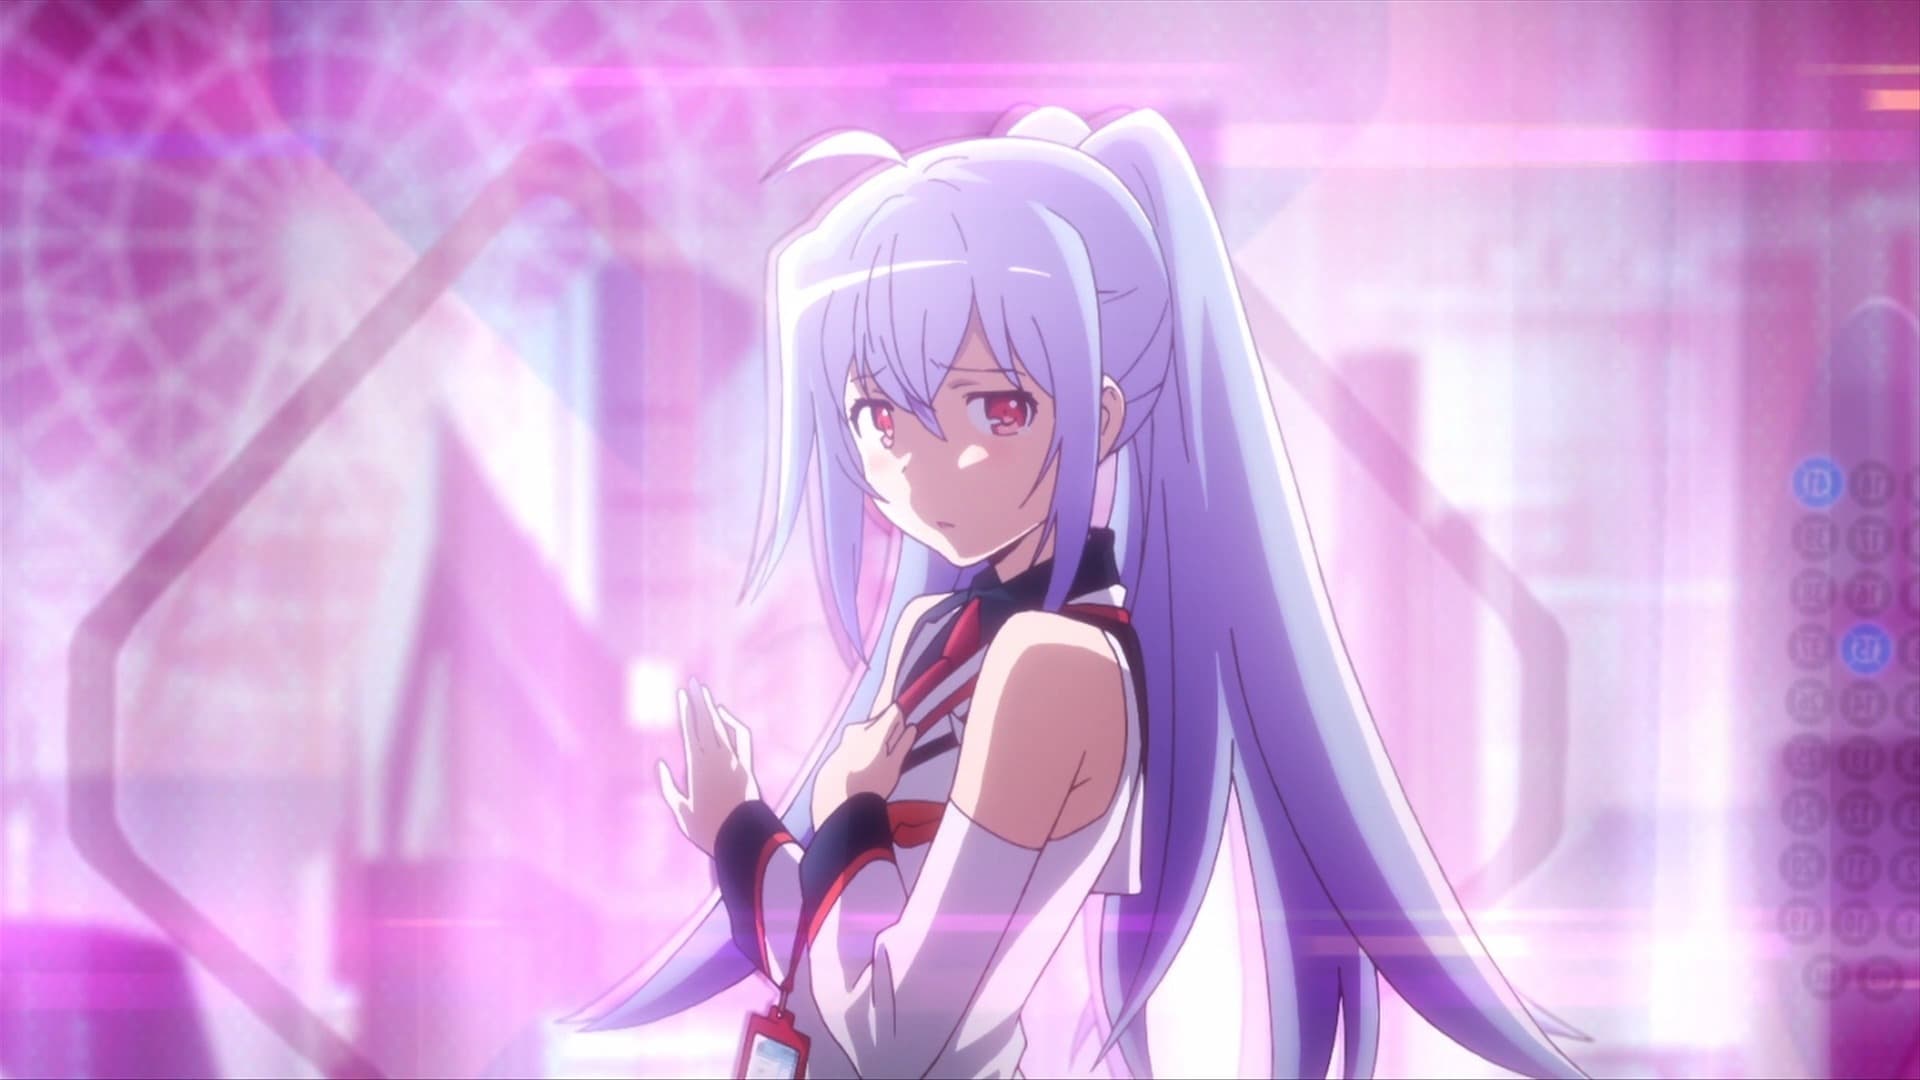 Plastic Memories Episode 9 Anime Review - Starting Point of The